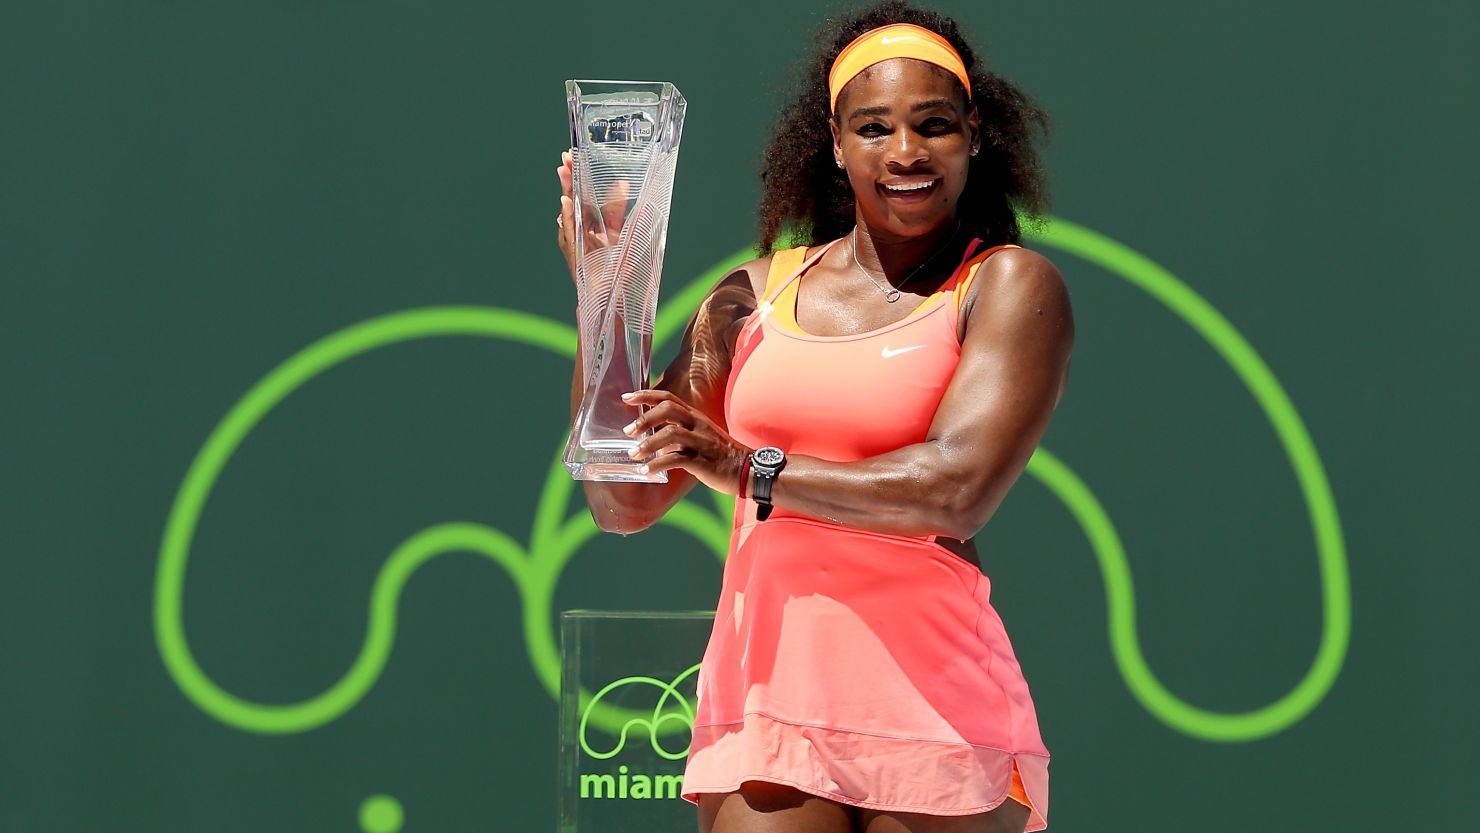 Serena Williams poses after winning the Miami WTA Open.